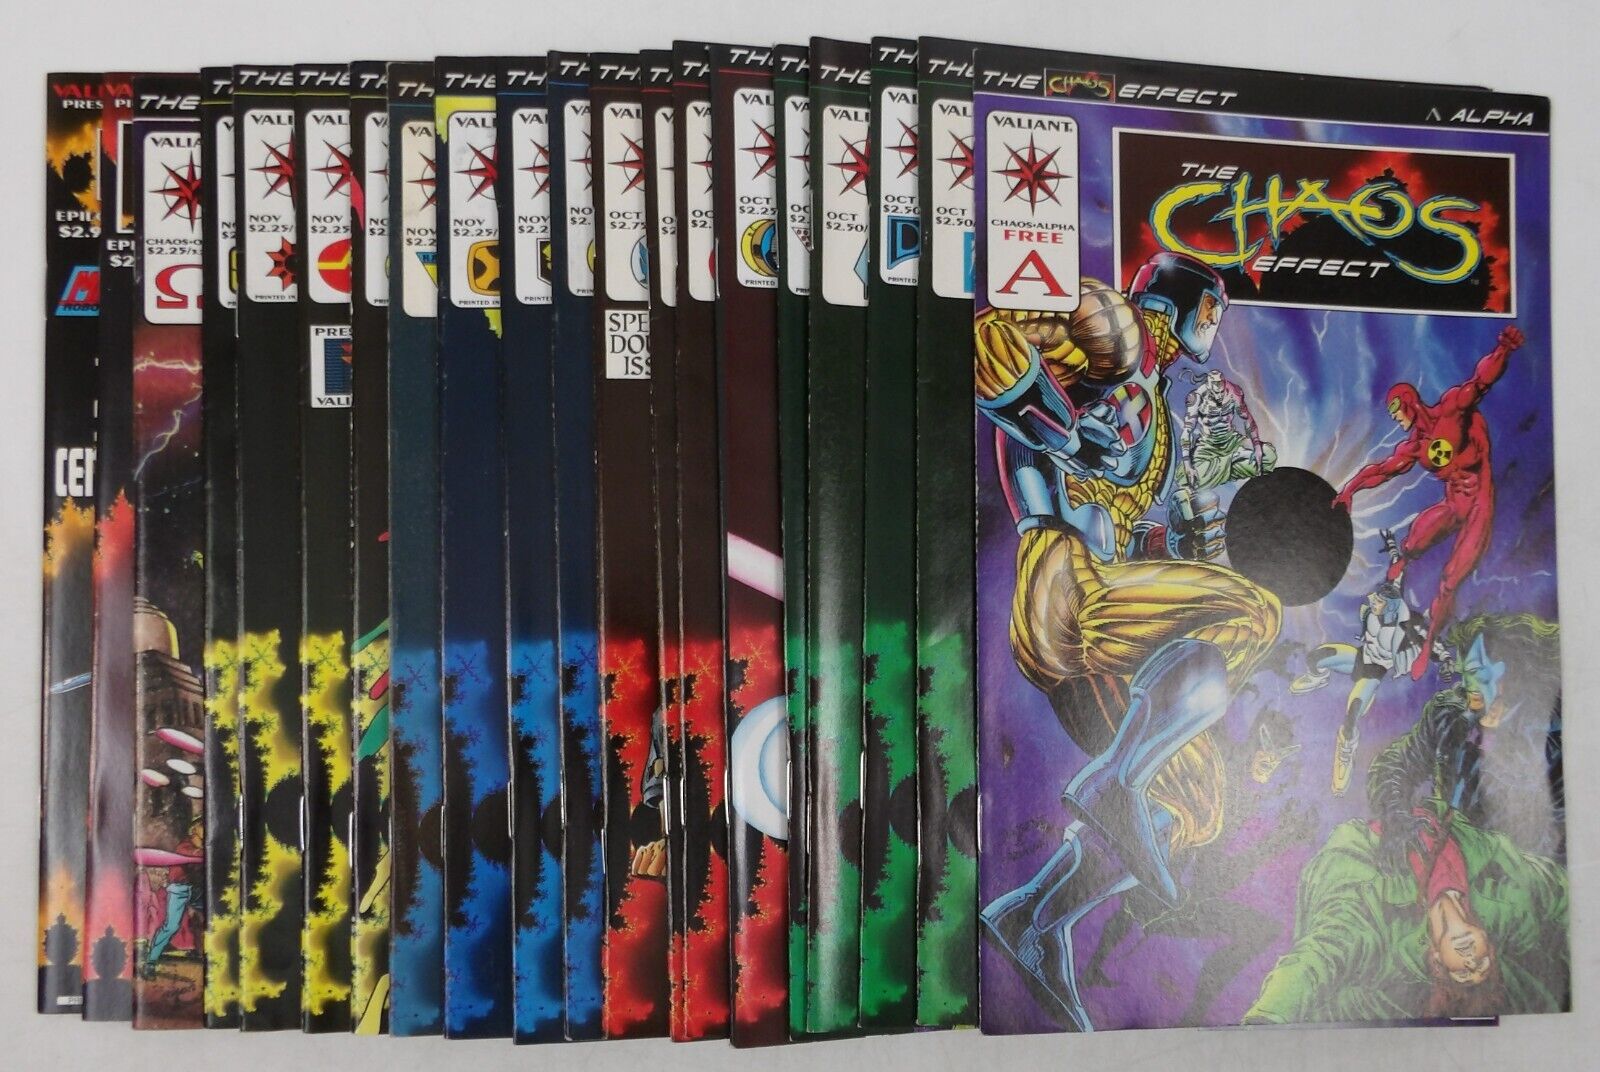 Chaos Effect #1-18 VF/NM complete Valiant crossover set + Epilogue 1-2